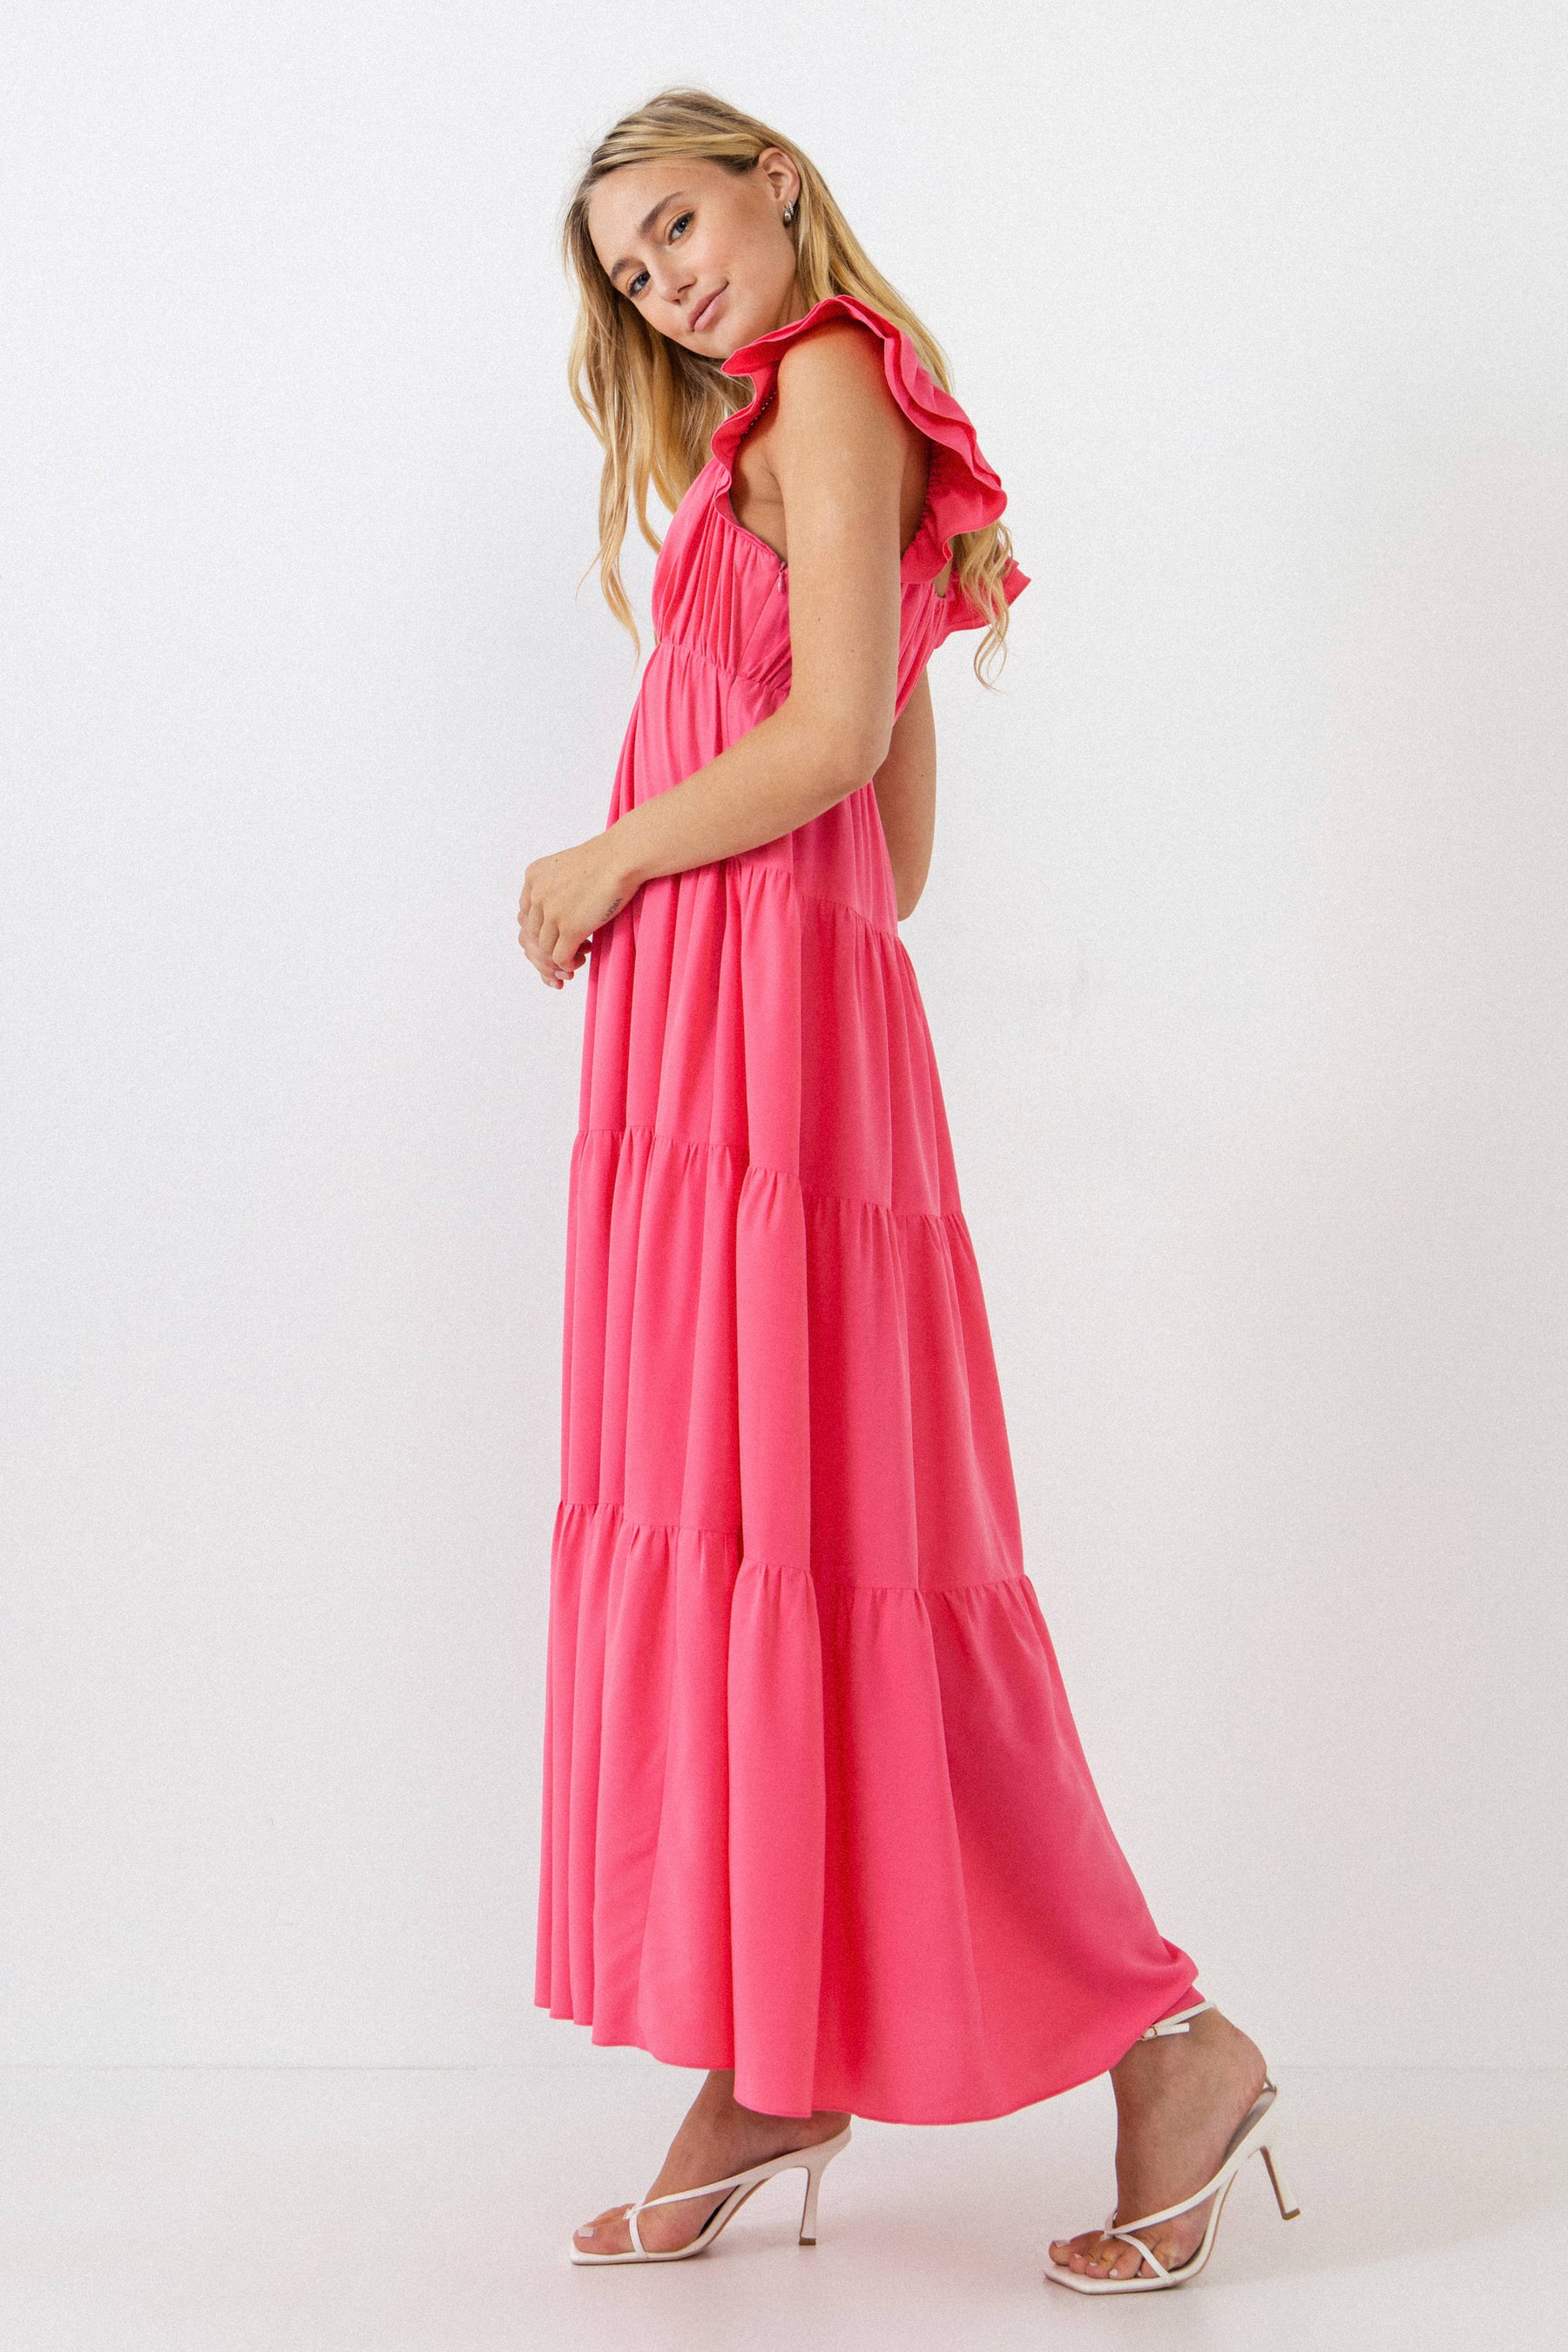 FREE THE ROSES - Ruffle Sleeve Maxi Dress - DRESSES available at Objectrare